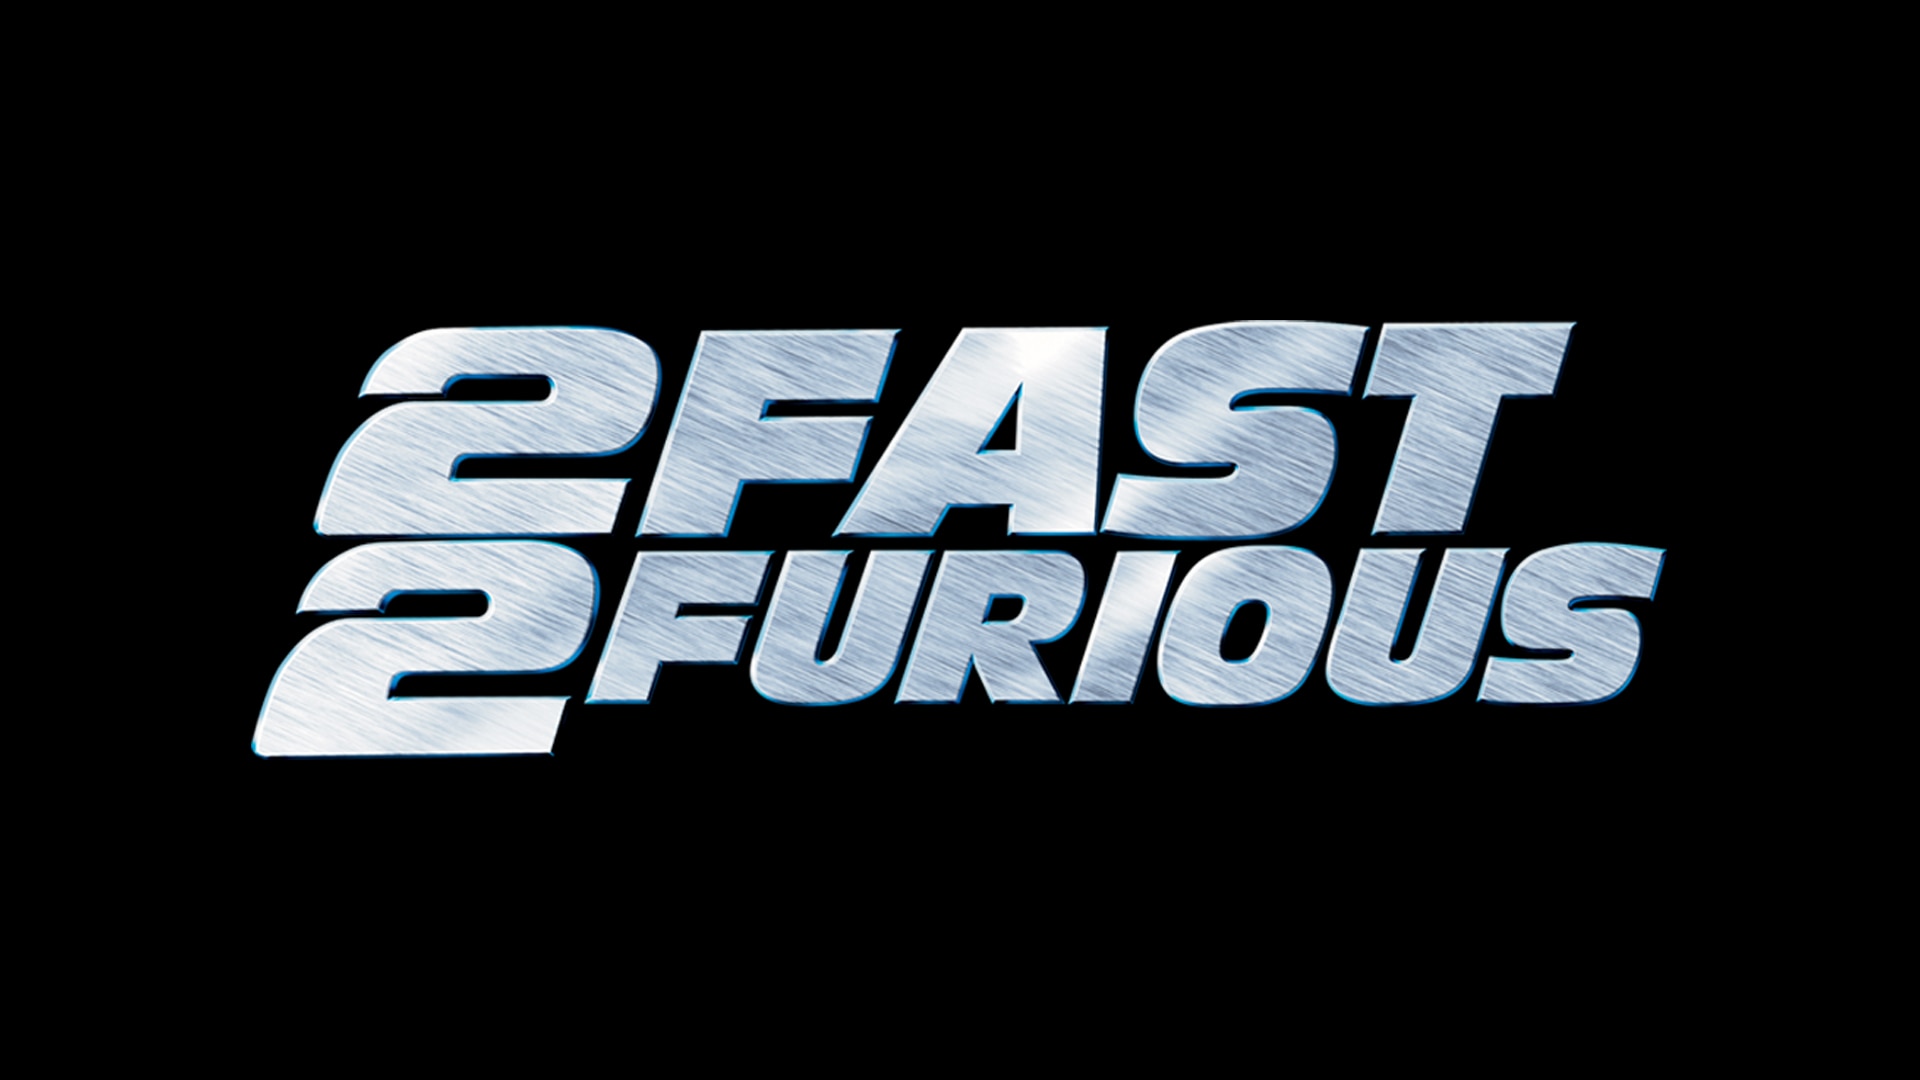 Second faster. Форсаж лого. Fast and Furious надпись. Fast and Furious 2 надпись. Надписи Форсажа 2.